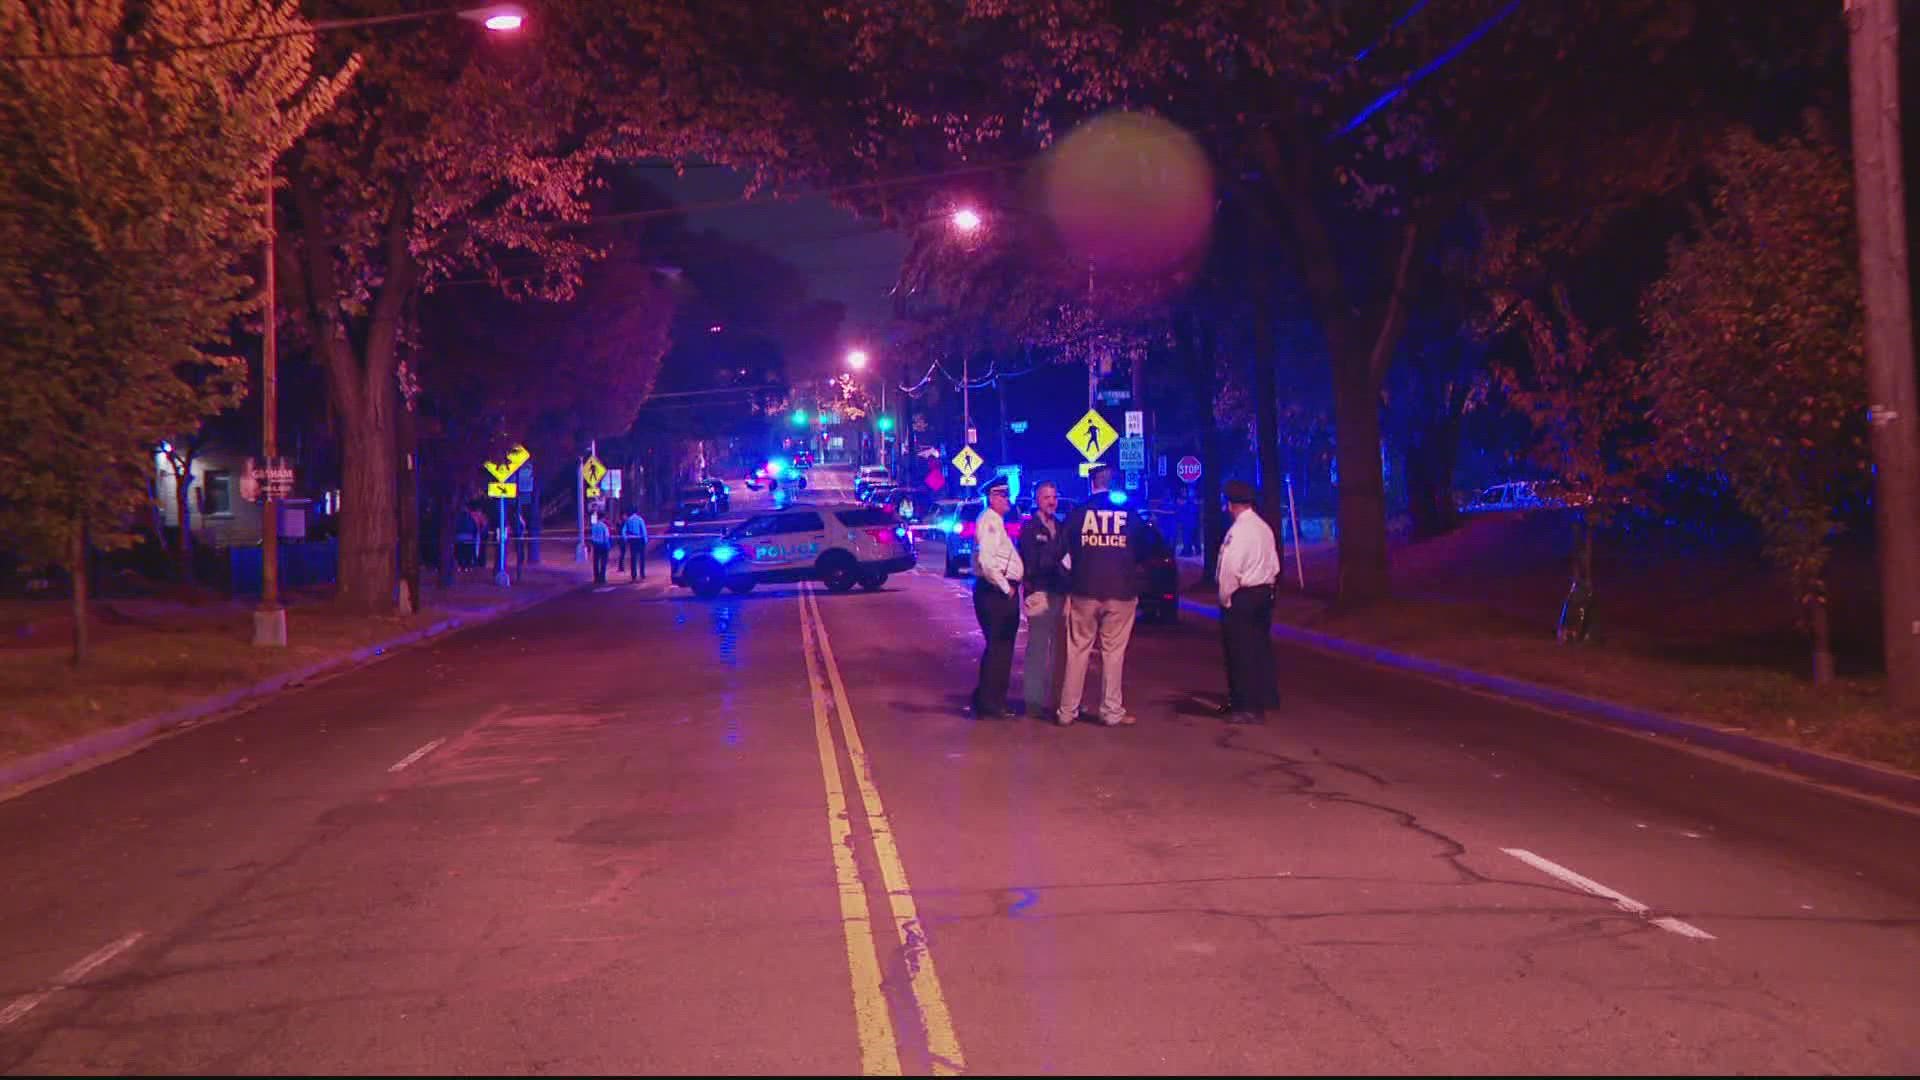 The boy was one of six people injured in four separate shootings that happened in D.C. in a two-hour period.